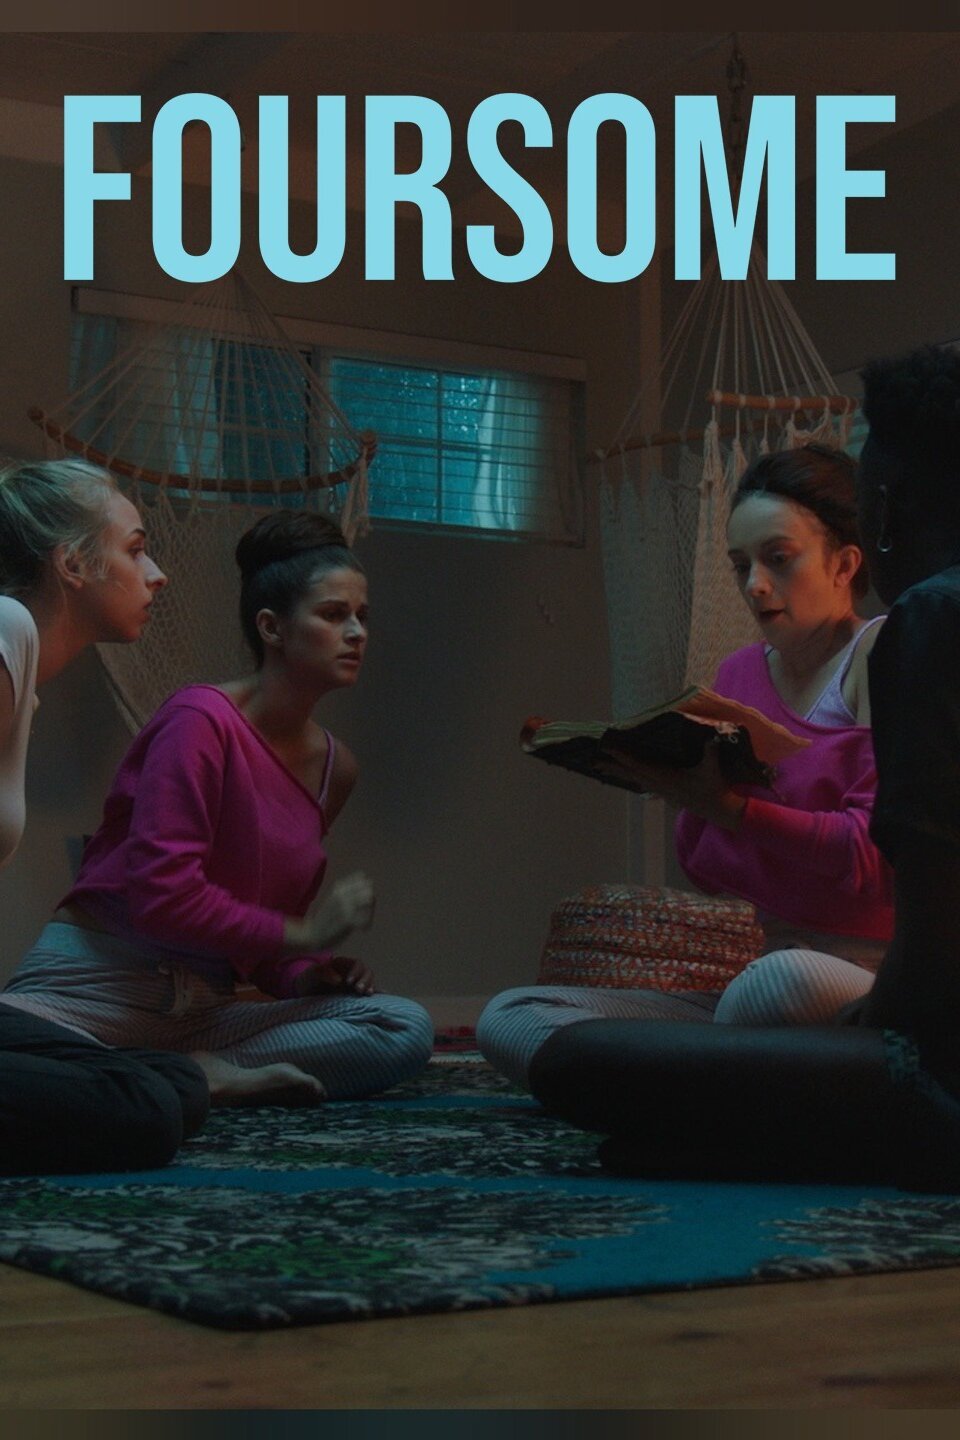 caitlin joan recommends Season 2 Of Foursome